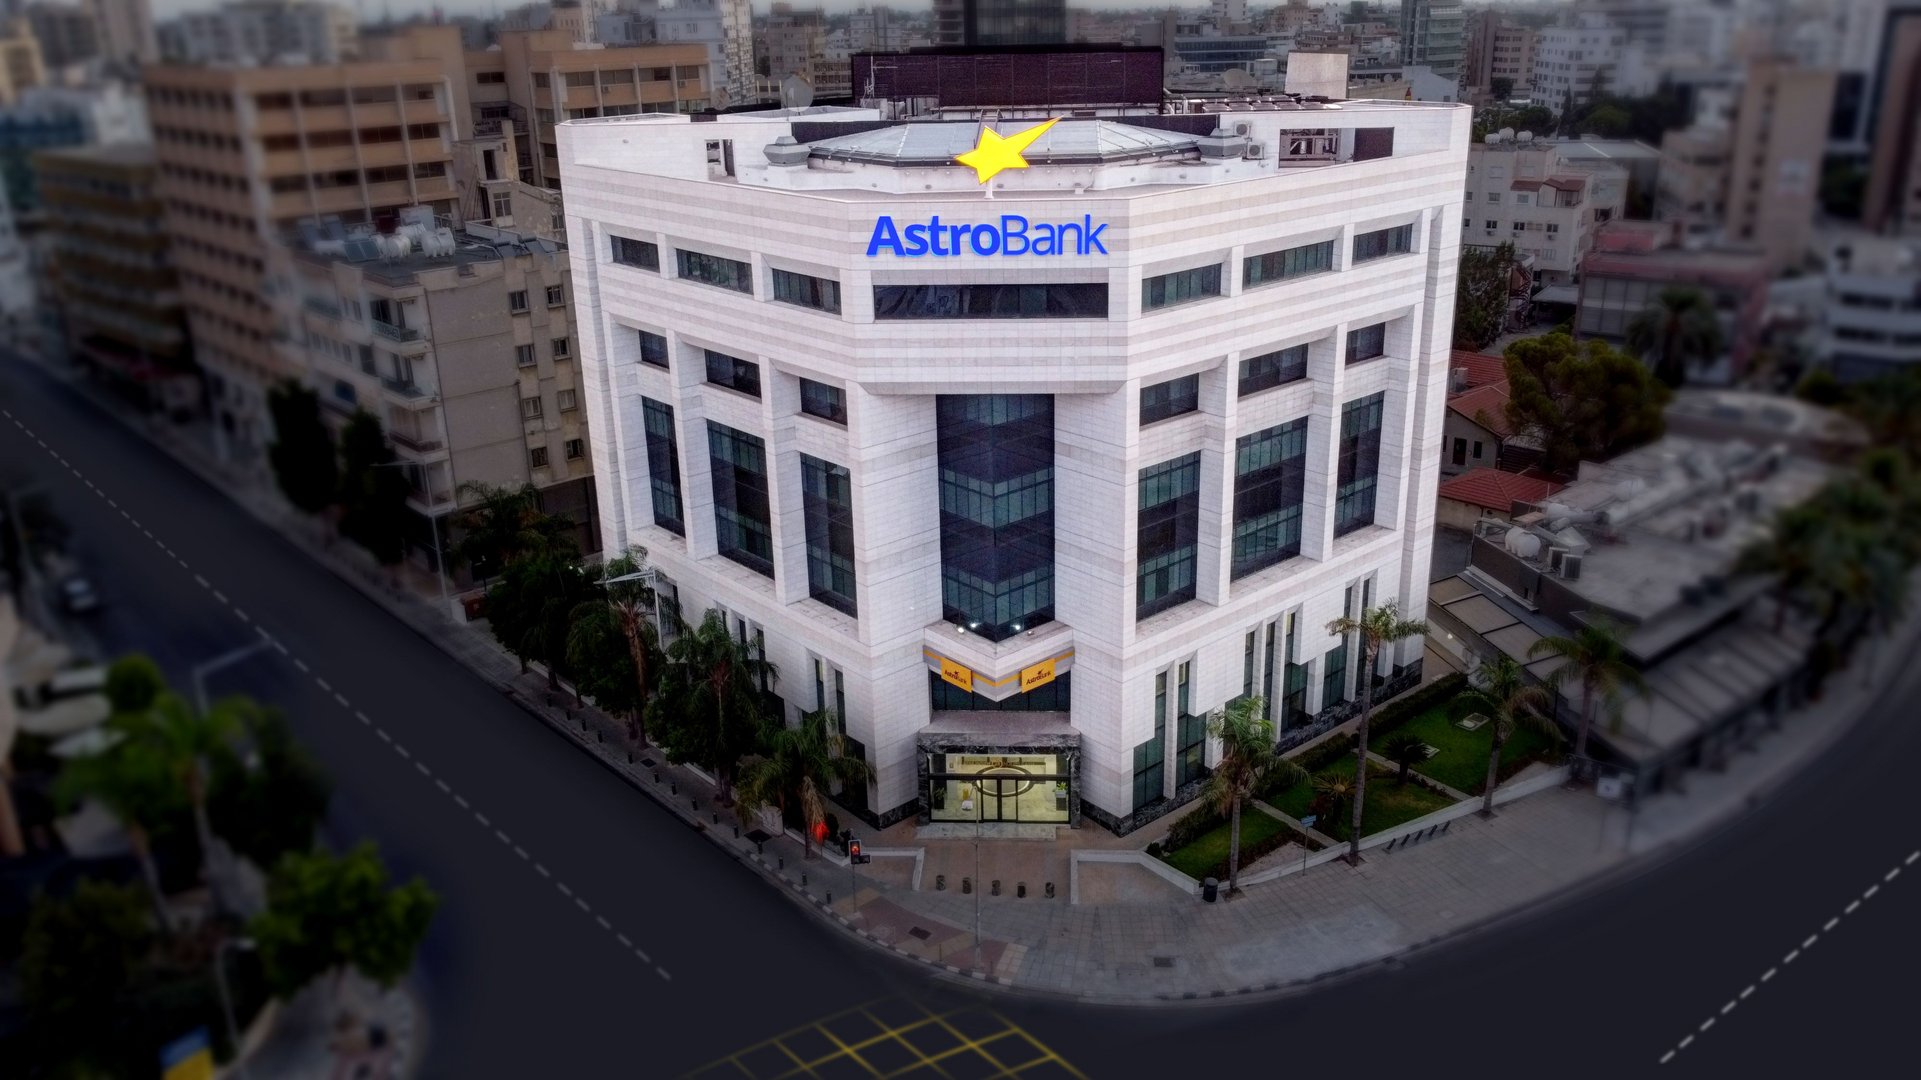 image AstroBank to freeze interest rate for first-time homebuyers